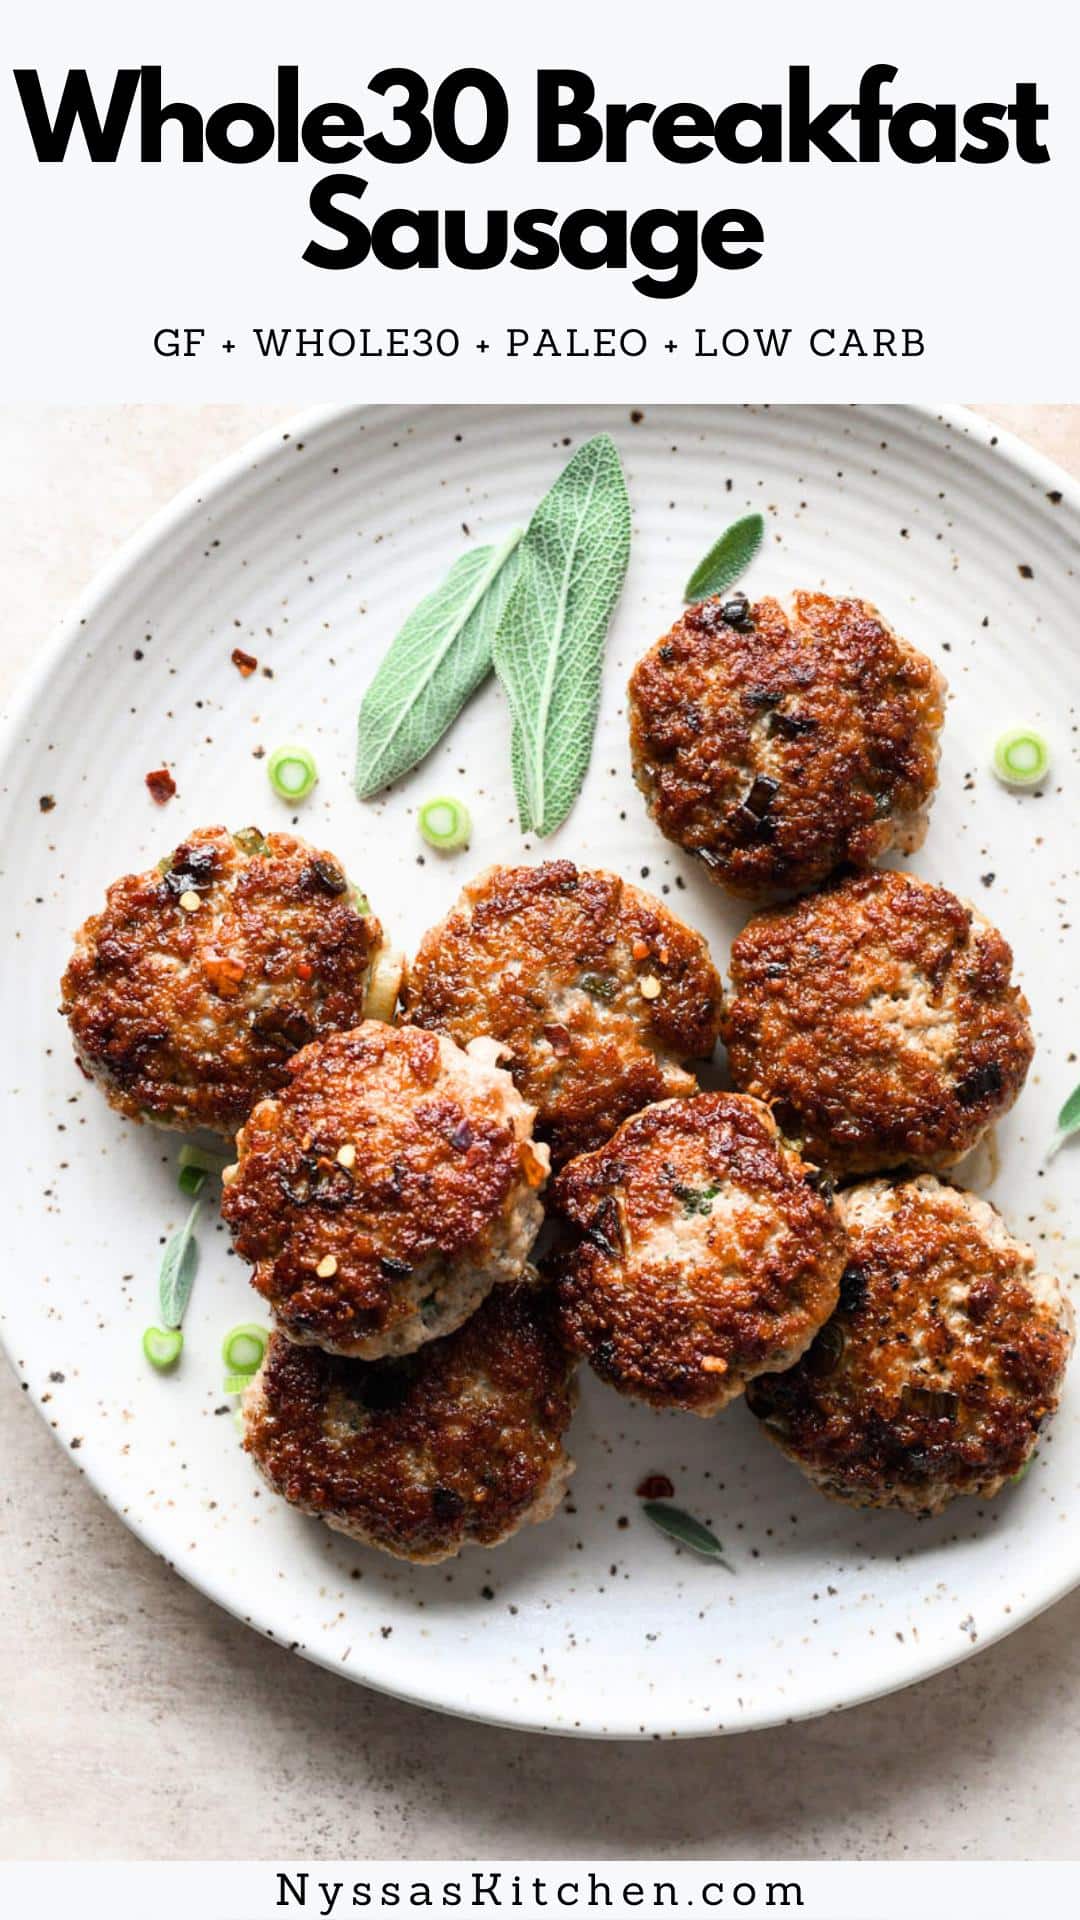 Whole30 breakfast sausage patties are delicious homemade sugar free breakfast recipe, whether you're doing a Whole30 or not! Made with ground pork, herbs, green onions, salt and pepper. Easy to make and full of flavor! Whole30, paleo, keto friendly, gluten free.